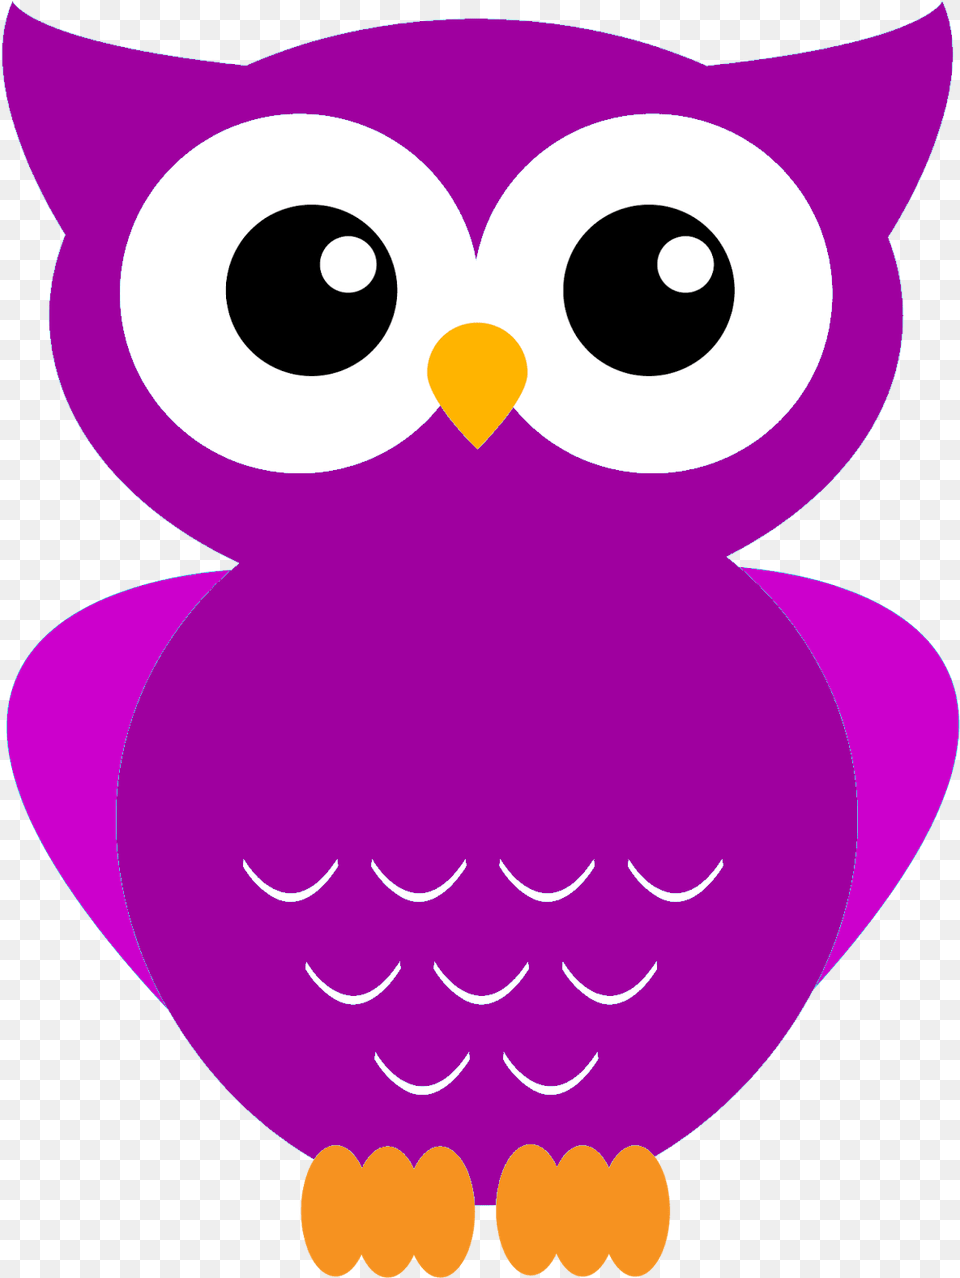 Clip Art Image Of Owl, Purple Free Png Download